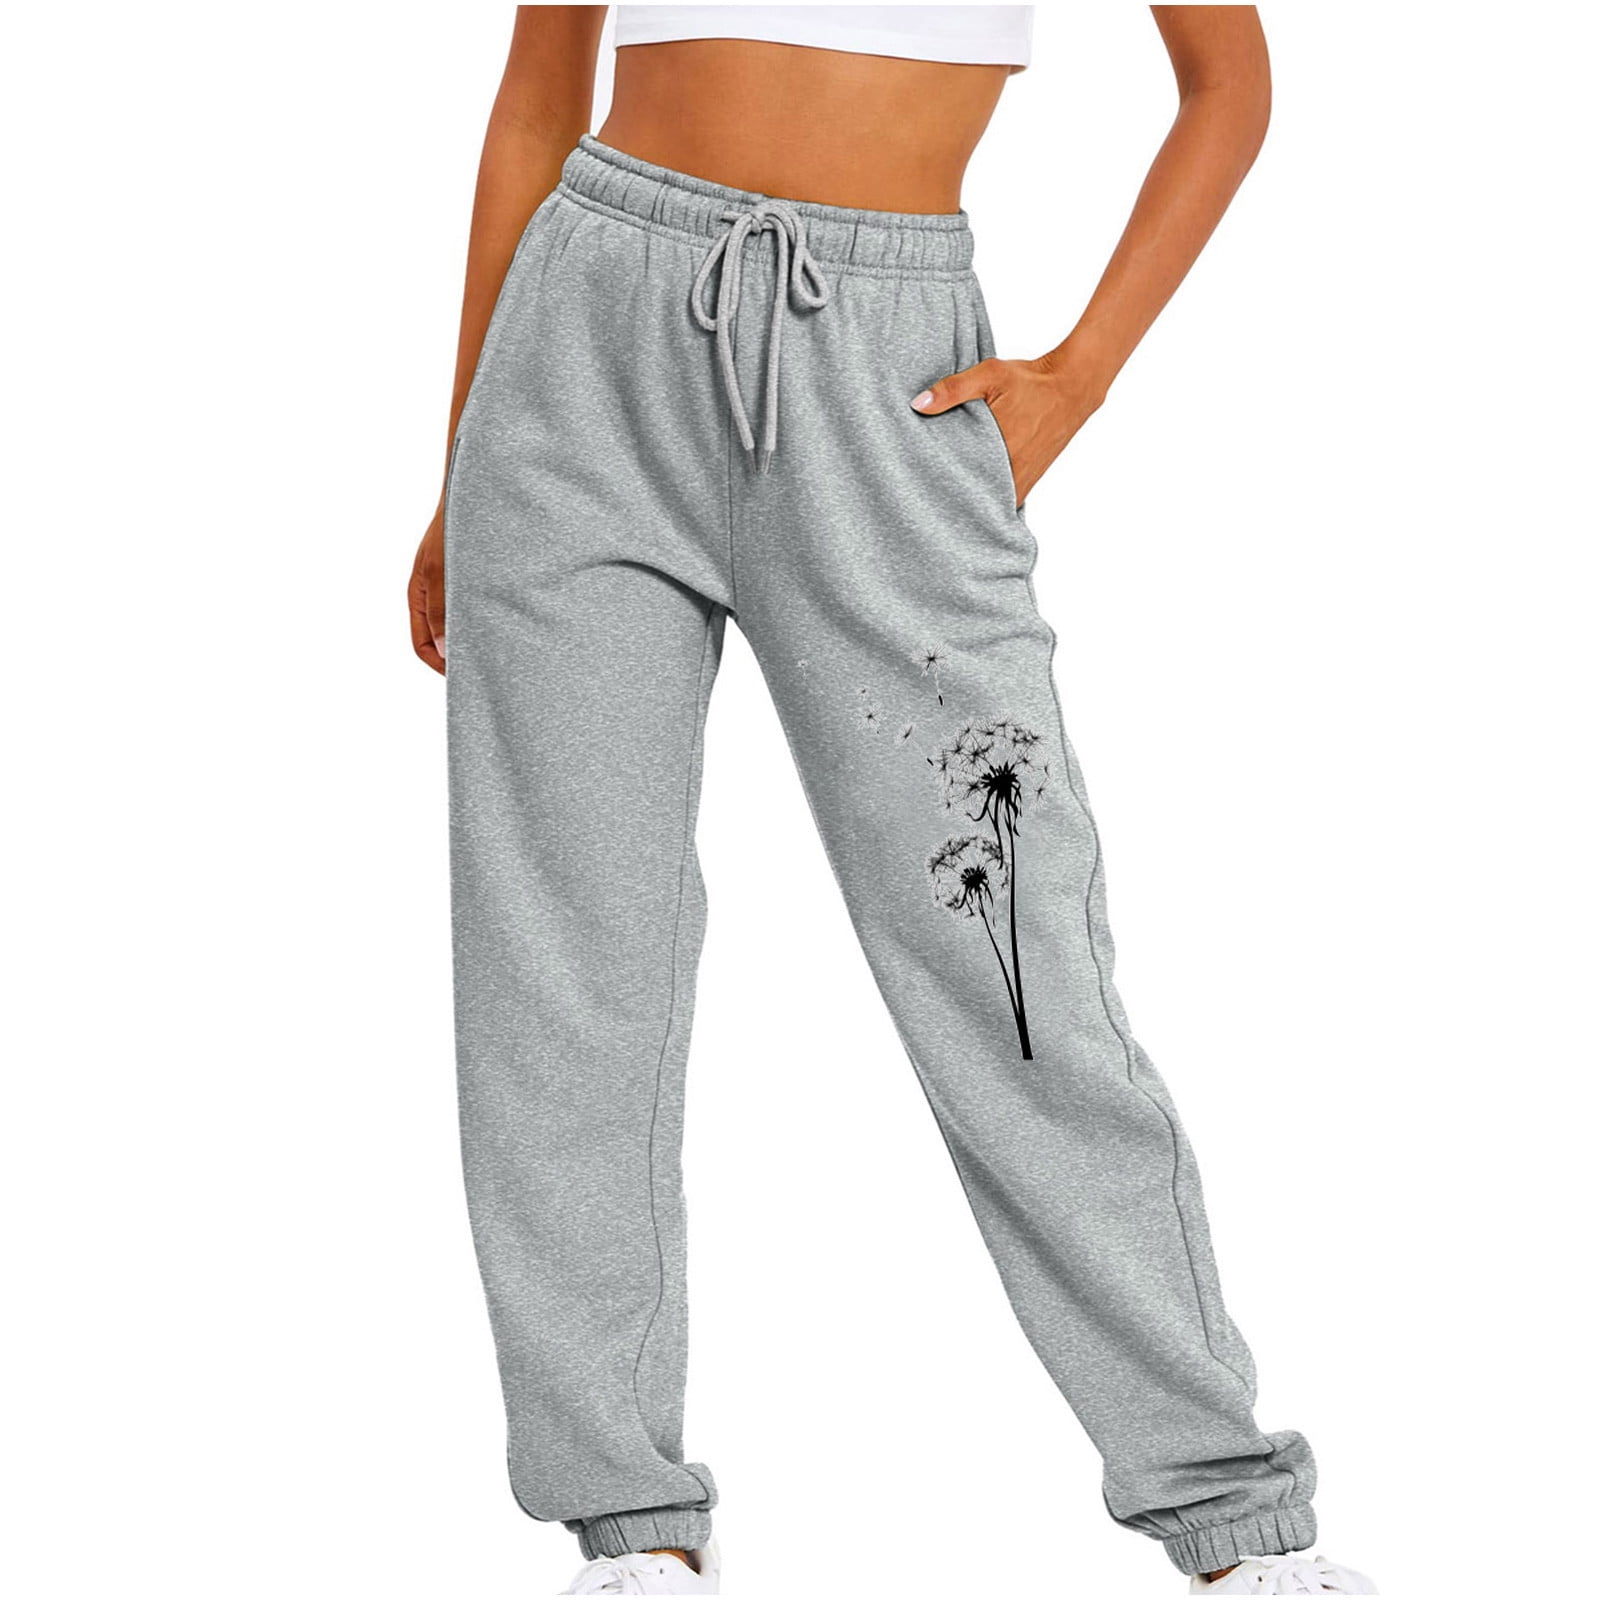 Women's Pants Fitness Sport Relaxed Loose Printing Elastic Waist Long  Sweatpants Ladies Joggers Soft Workout Trousers (XX-Large, GrayA3) 